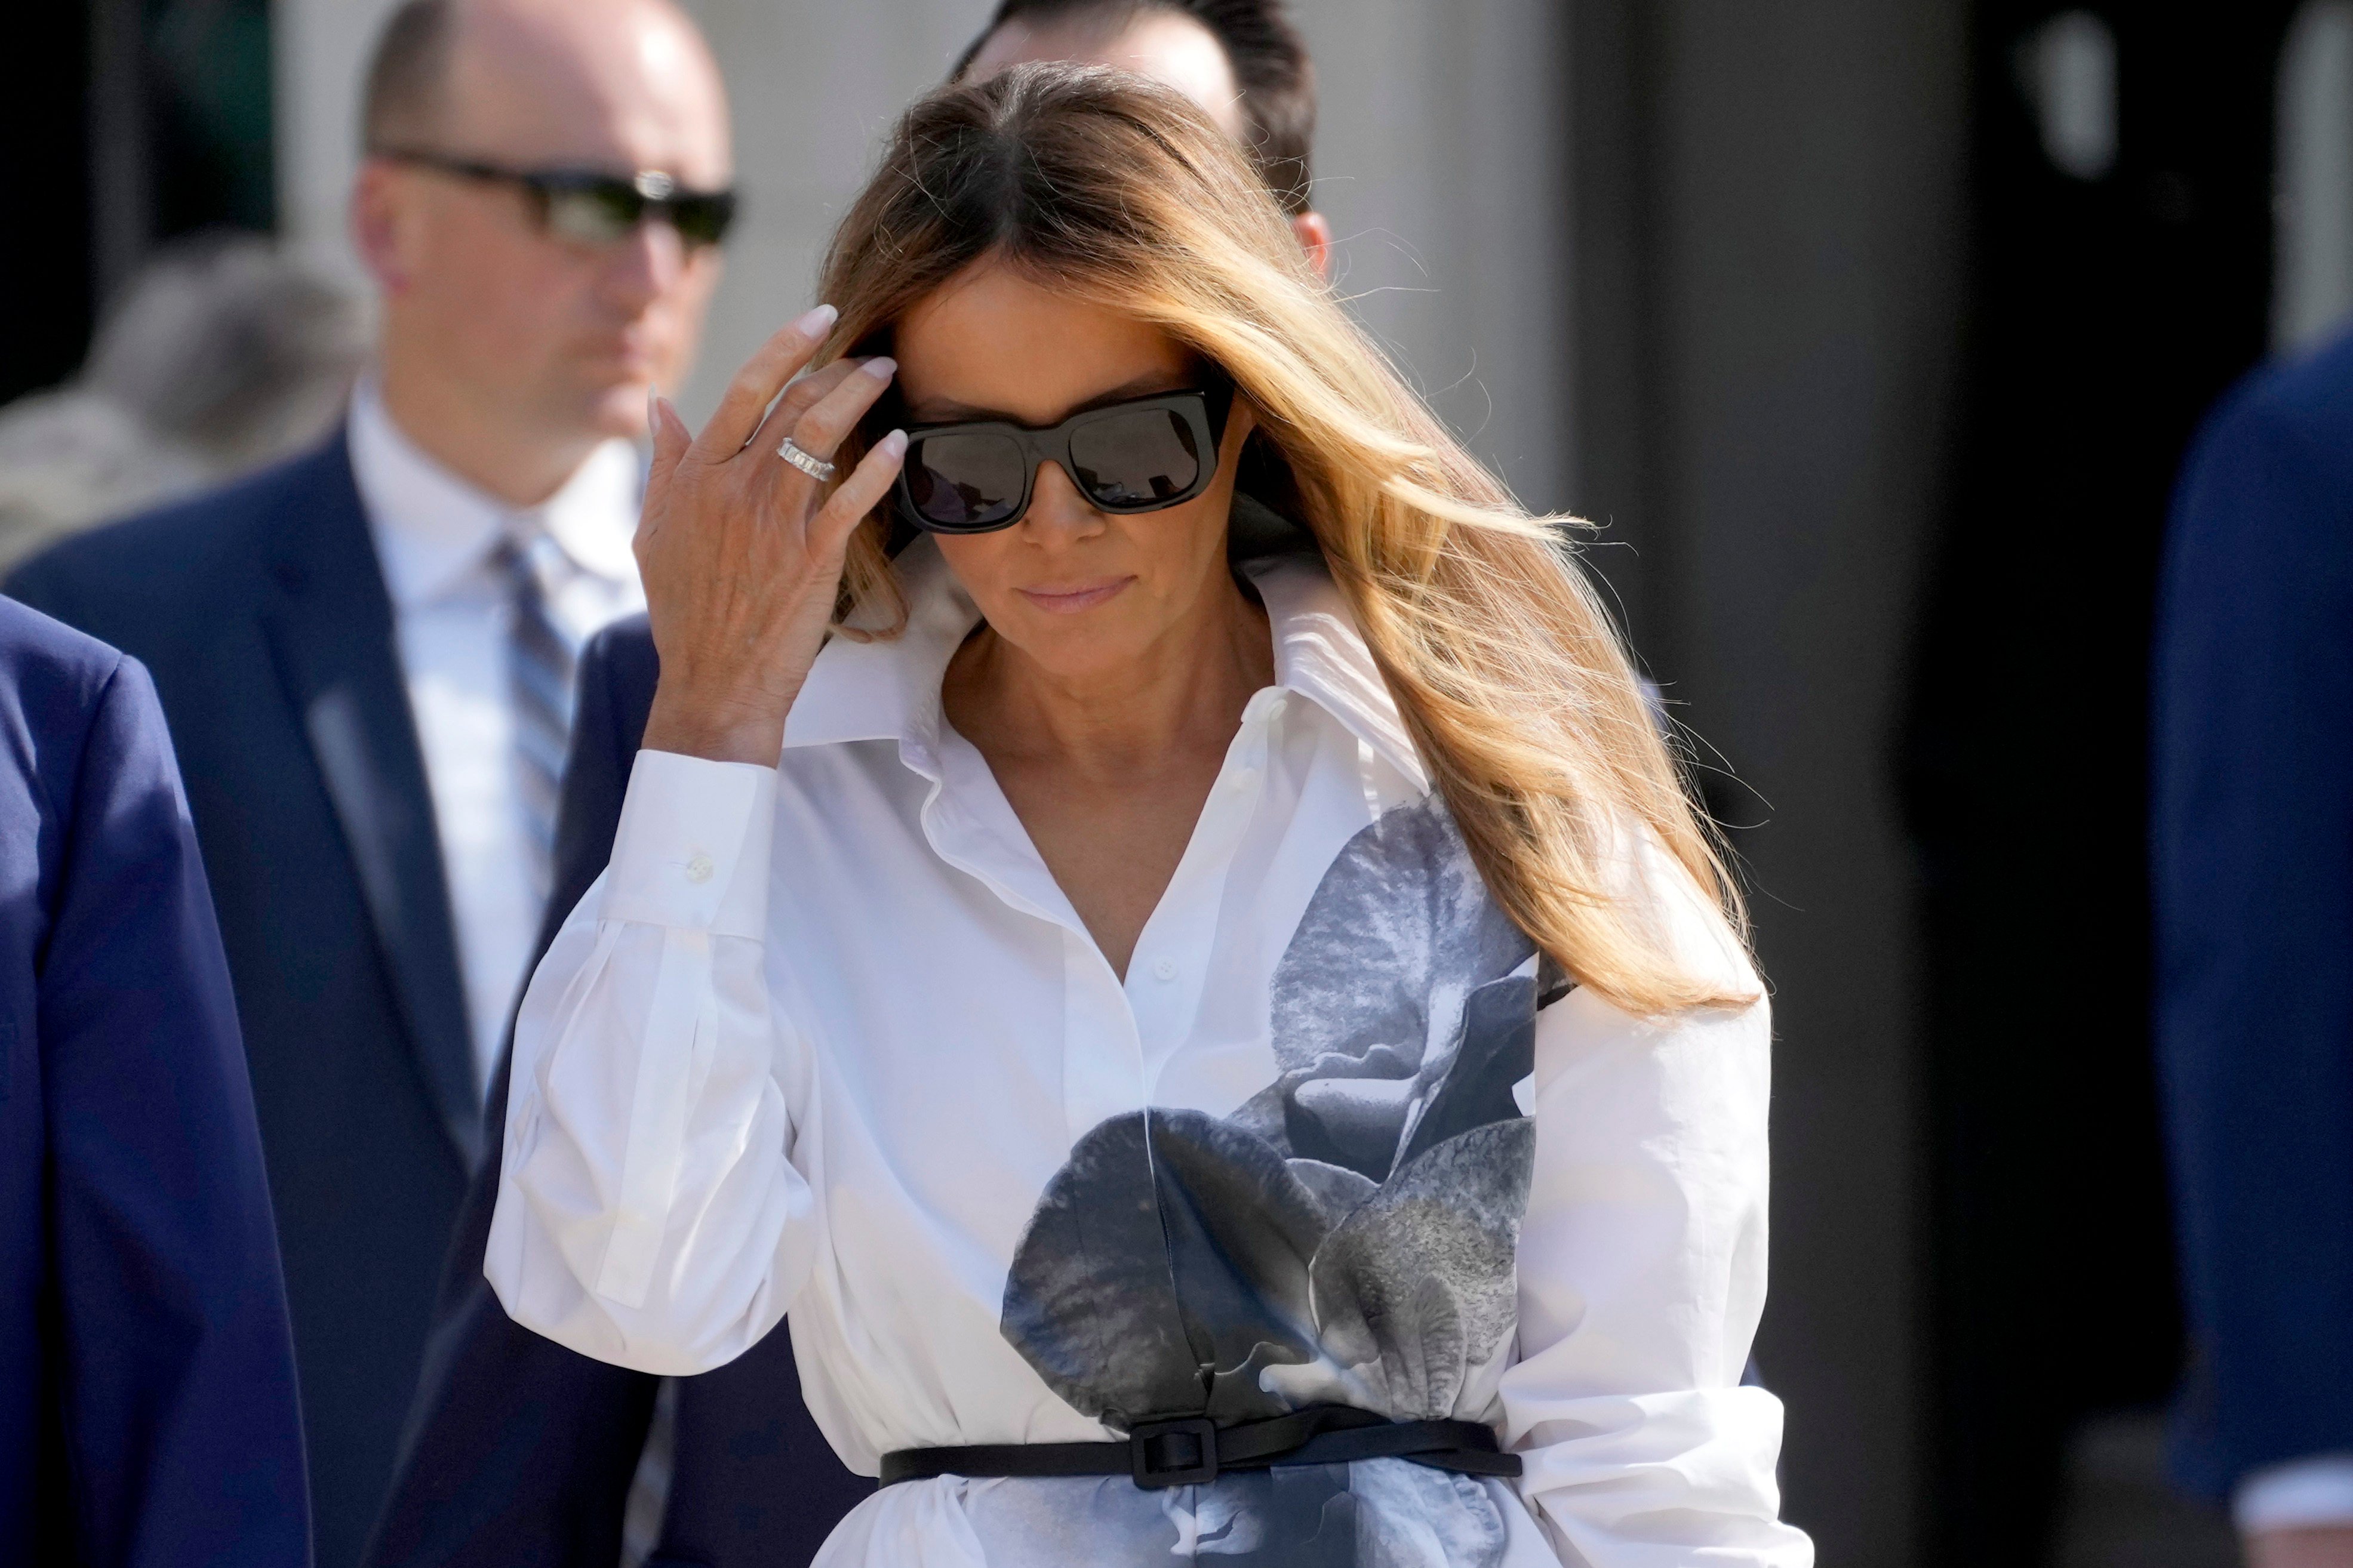 Former first lady Melania Trump has missed key events in her husband’s preidential campaign. Photo: AP